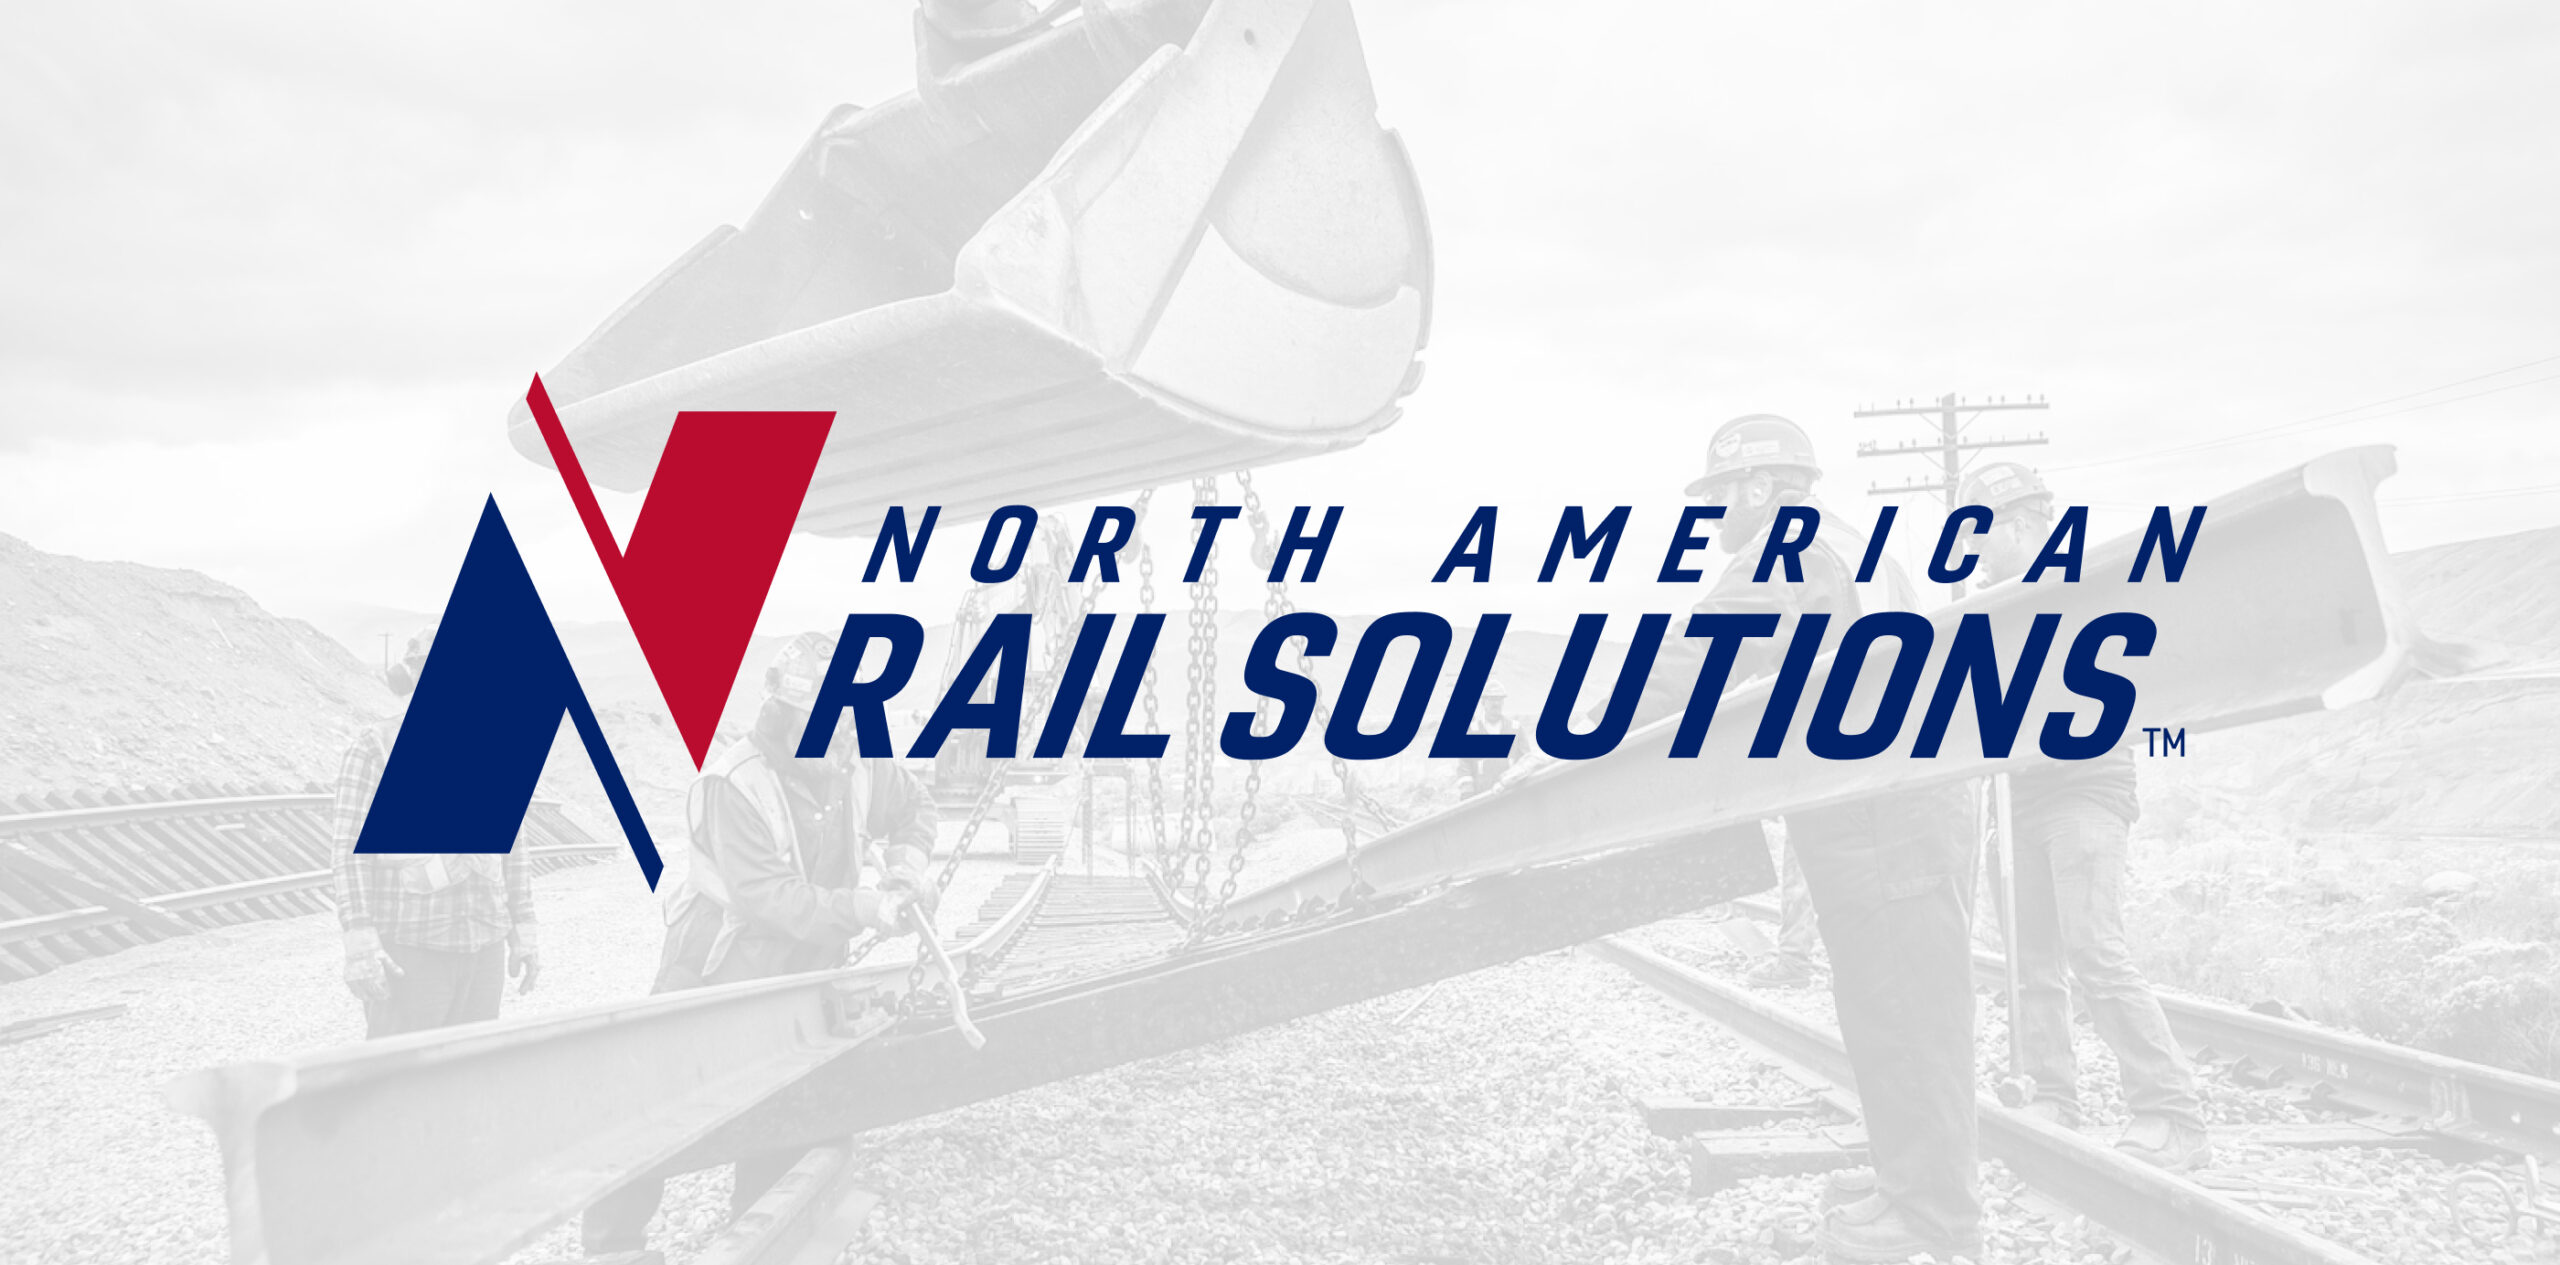 Bailey Brand Consulting - North American Rail Solutions Logo atop a white and gray photo of rail workers